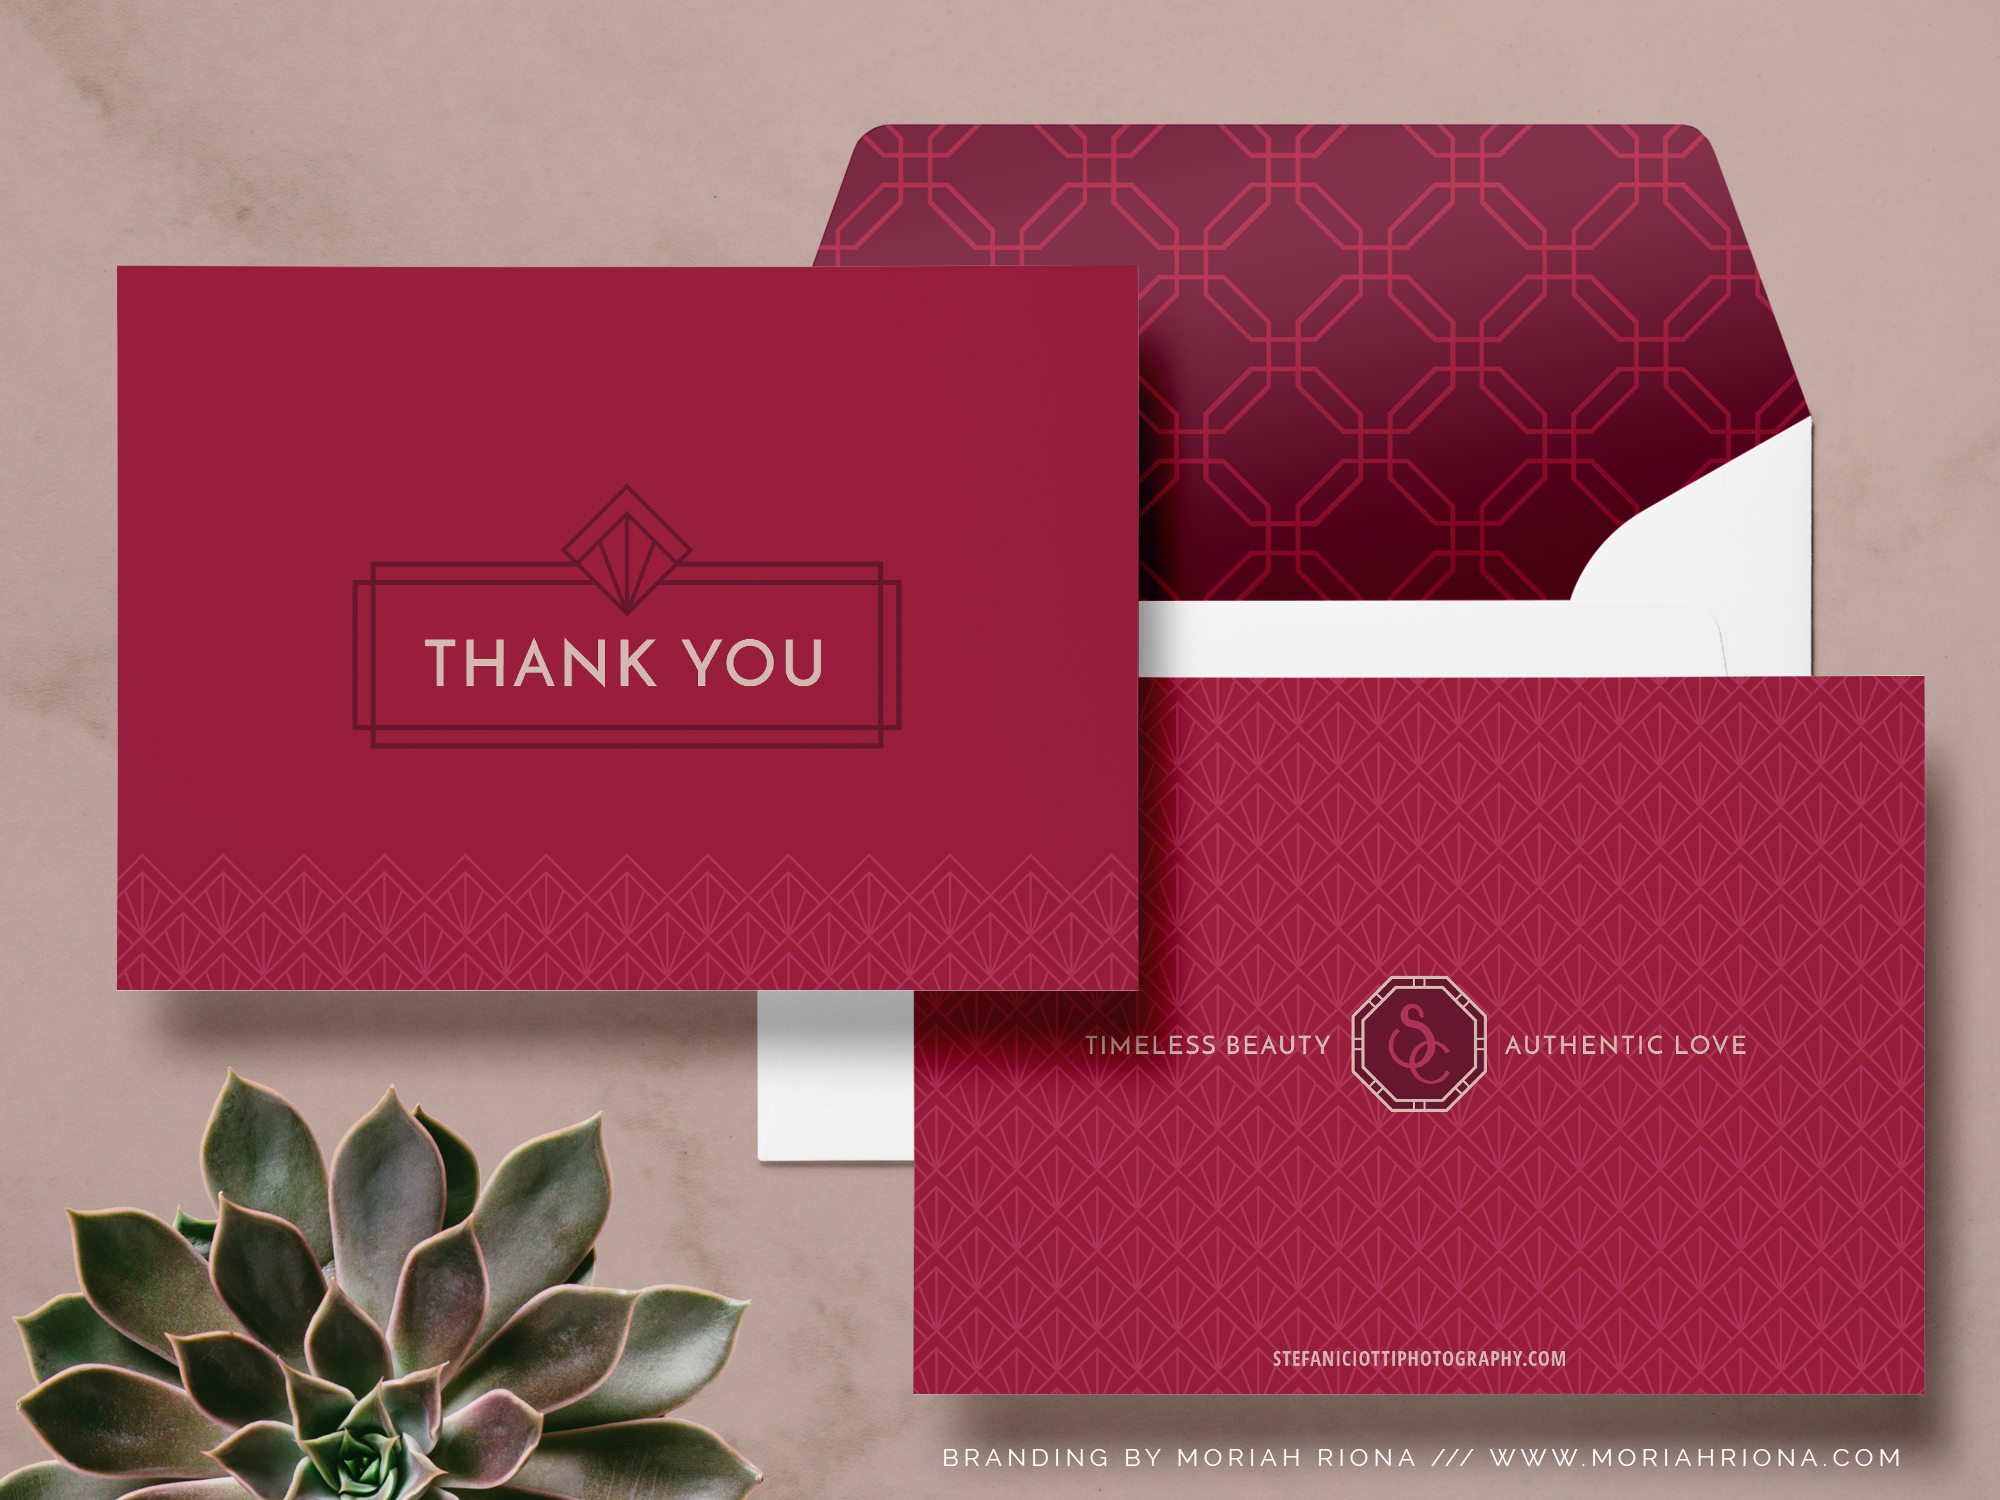 Branded stationery set designed my Moriah Riona for wedding photographer, Stefani Ciotti. From Branding Collection with burgundy and copper color palette. Luxe glam branding and website design for wedding photographer by Moriah Riona. Custom designed Showit 5 website. Graphic Design and Branding for photographers and creative bossladies.